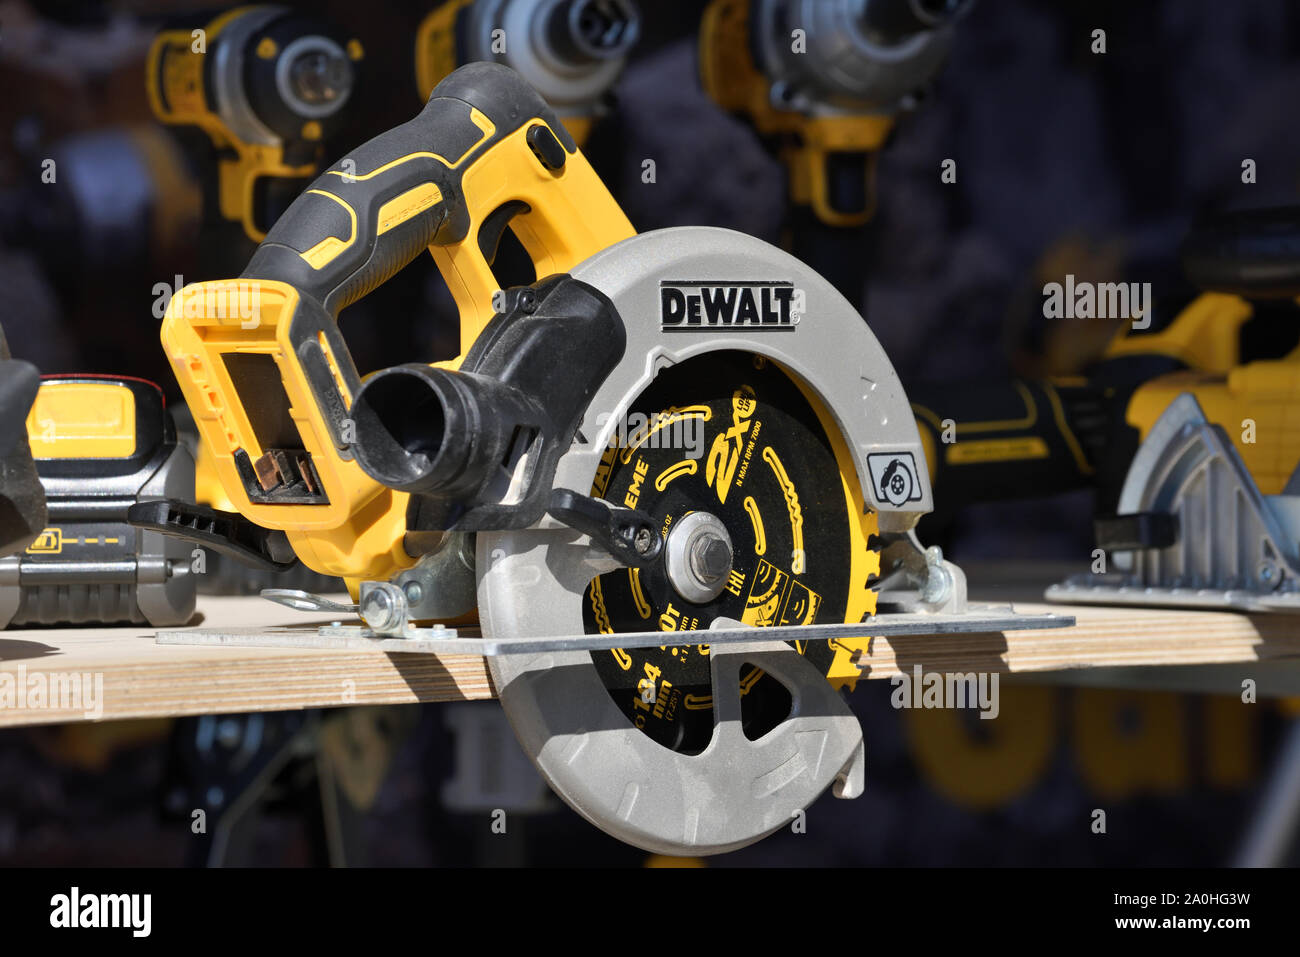 Kaunas, Lithuania - April 04: DeWalt power tools in Kaunas on April 04, 2019. DeWalt is an American worldwide brand of power tools and hand tools for Stock Photo